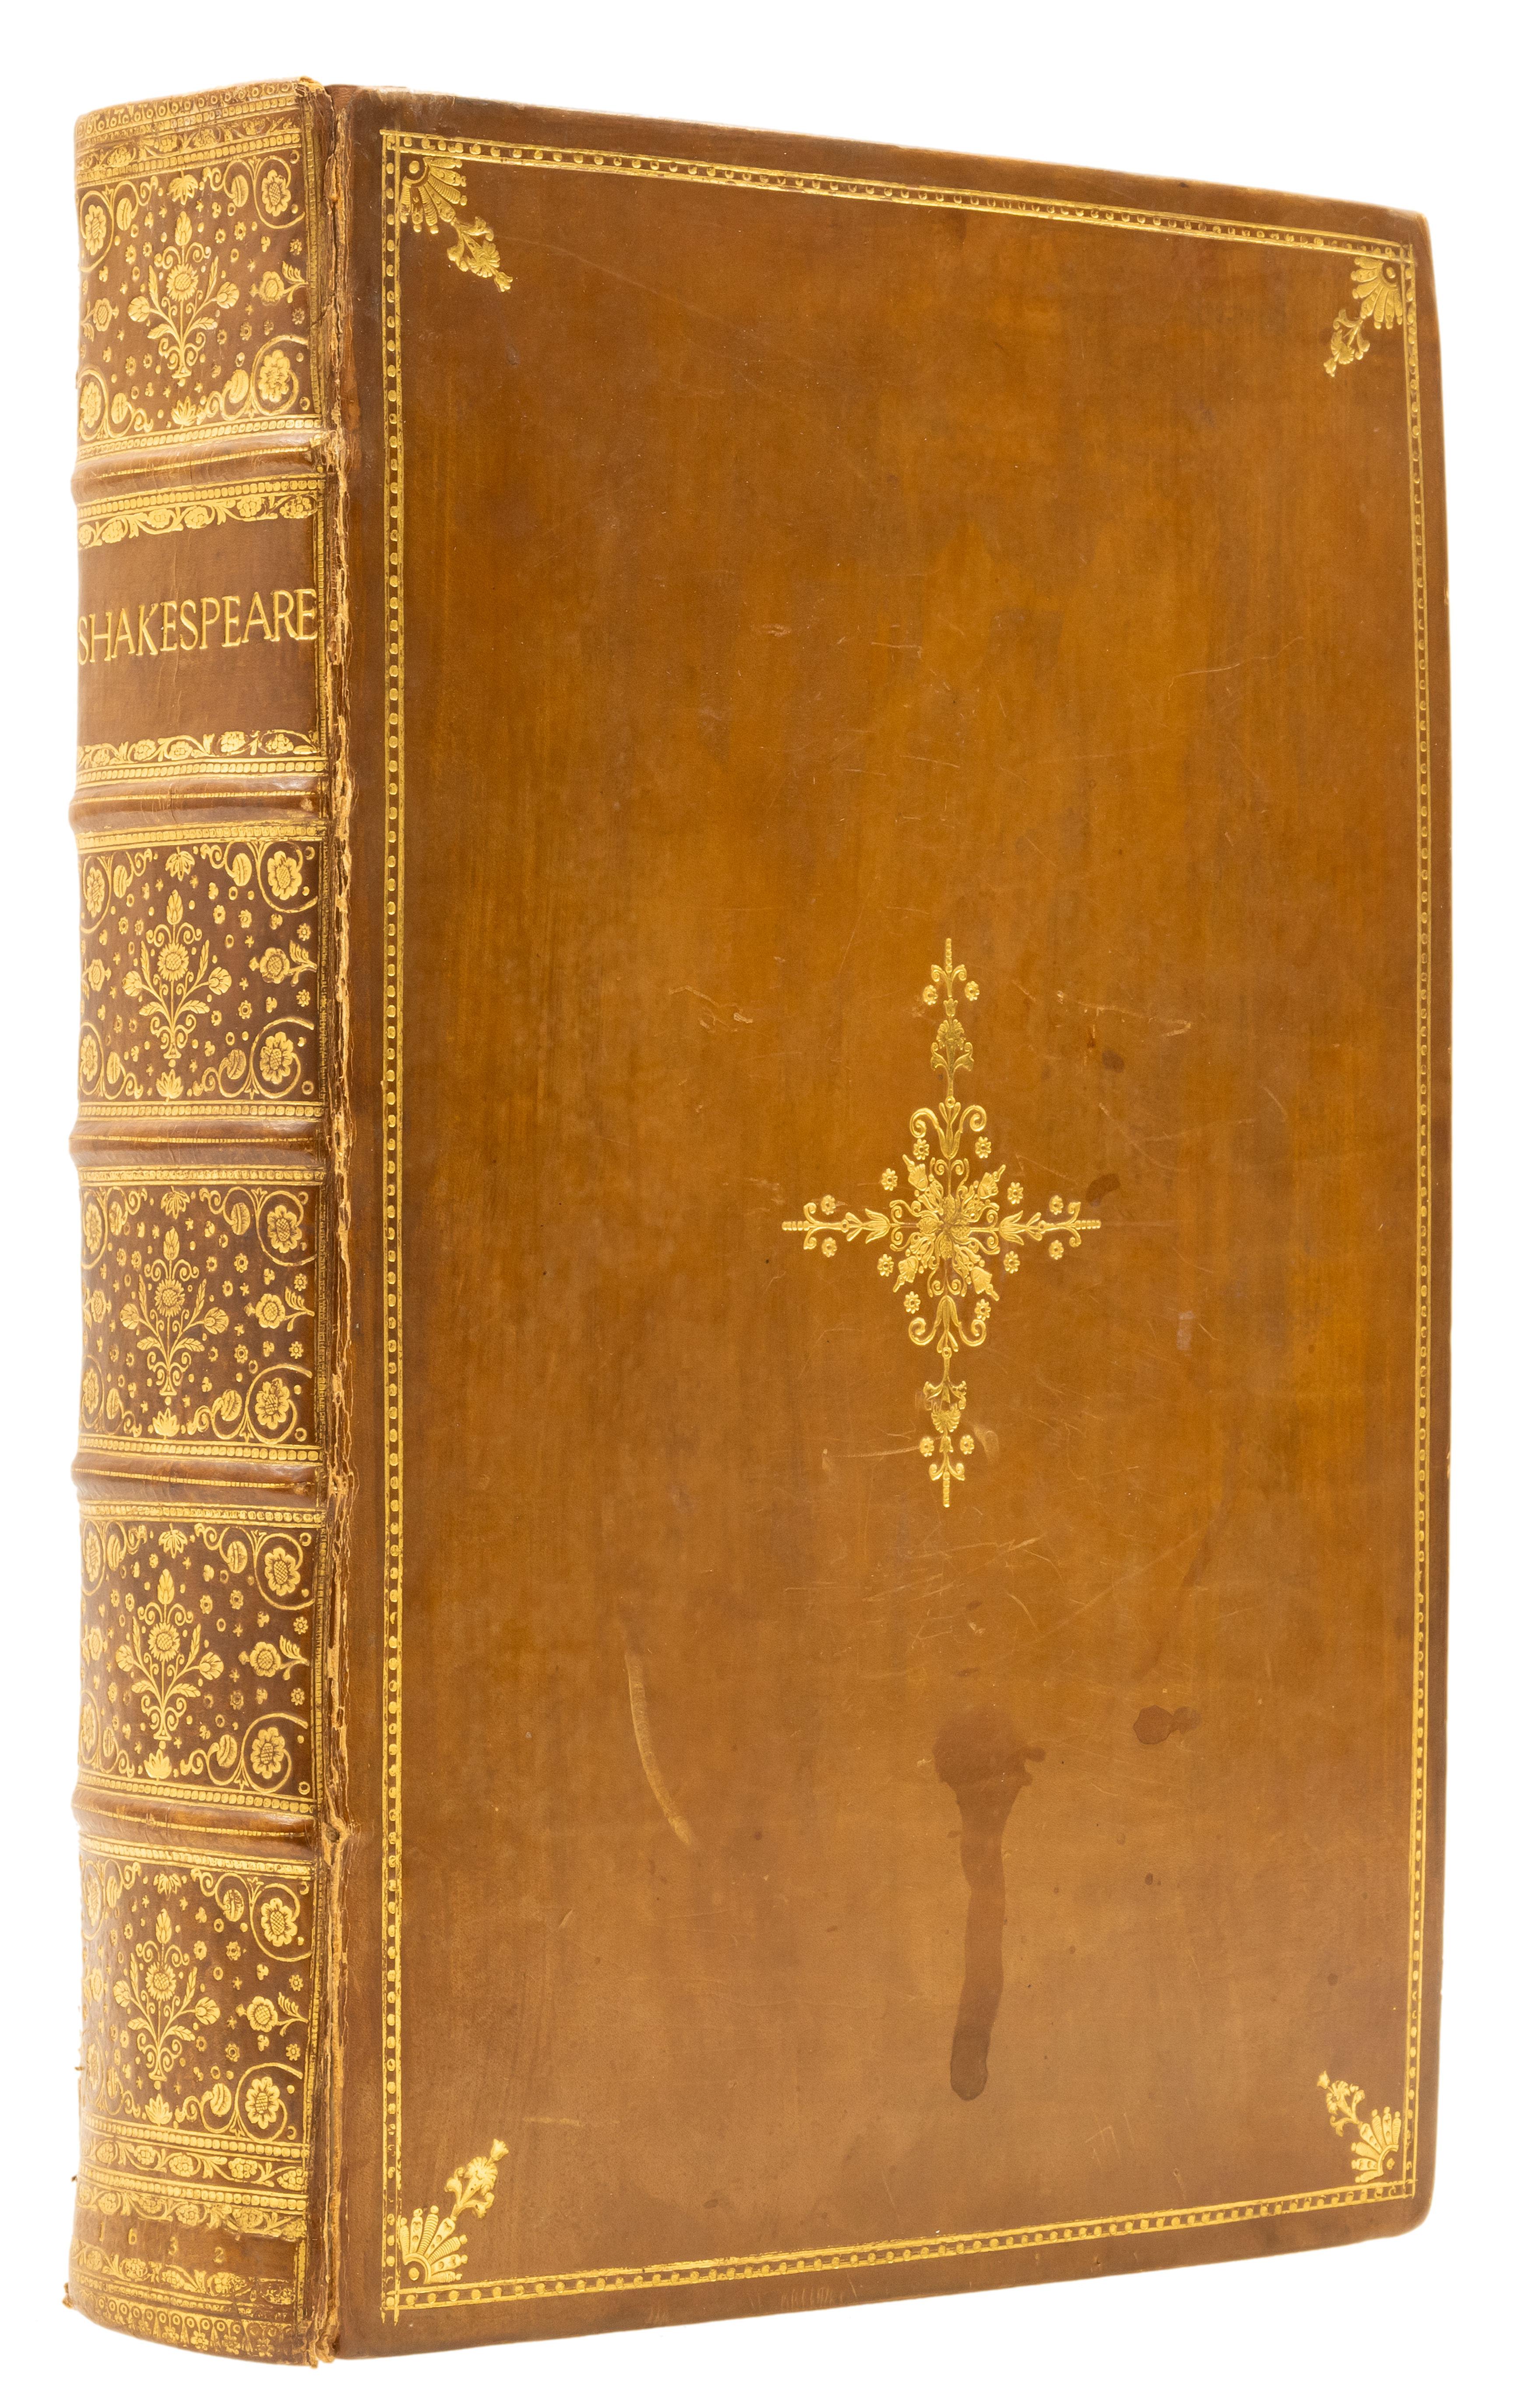 [Shakespeare (William)] [Comedies, Histories, and Tragedies], second folio edition, [by Tho.Cotes...